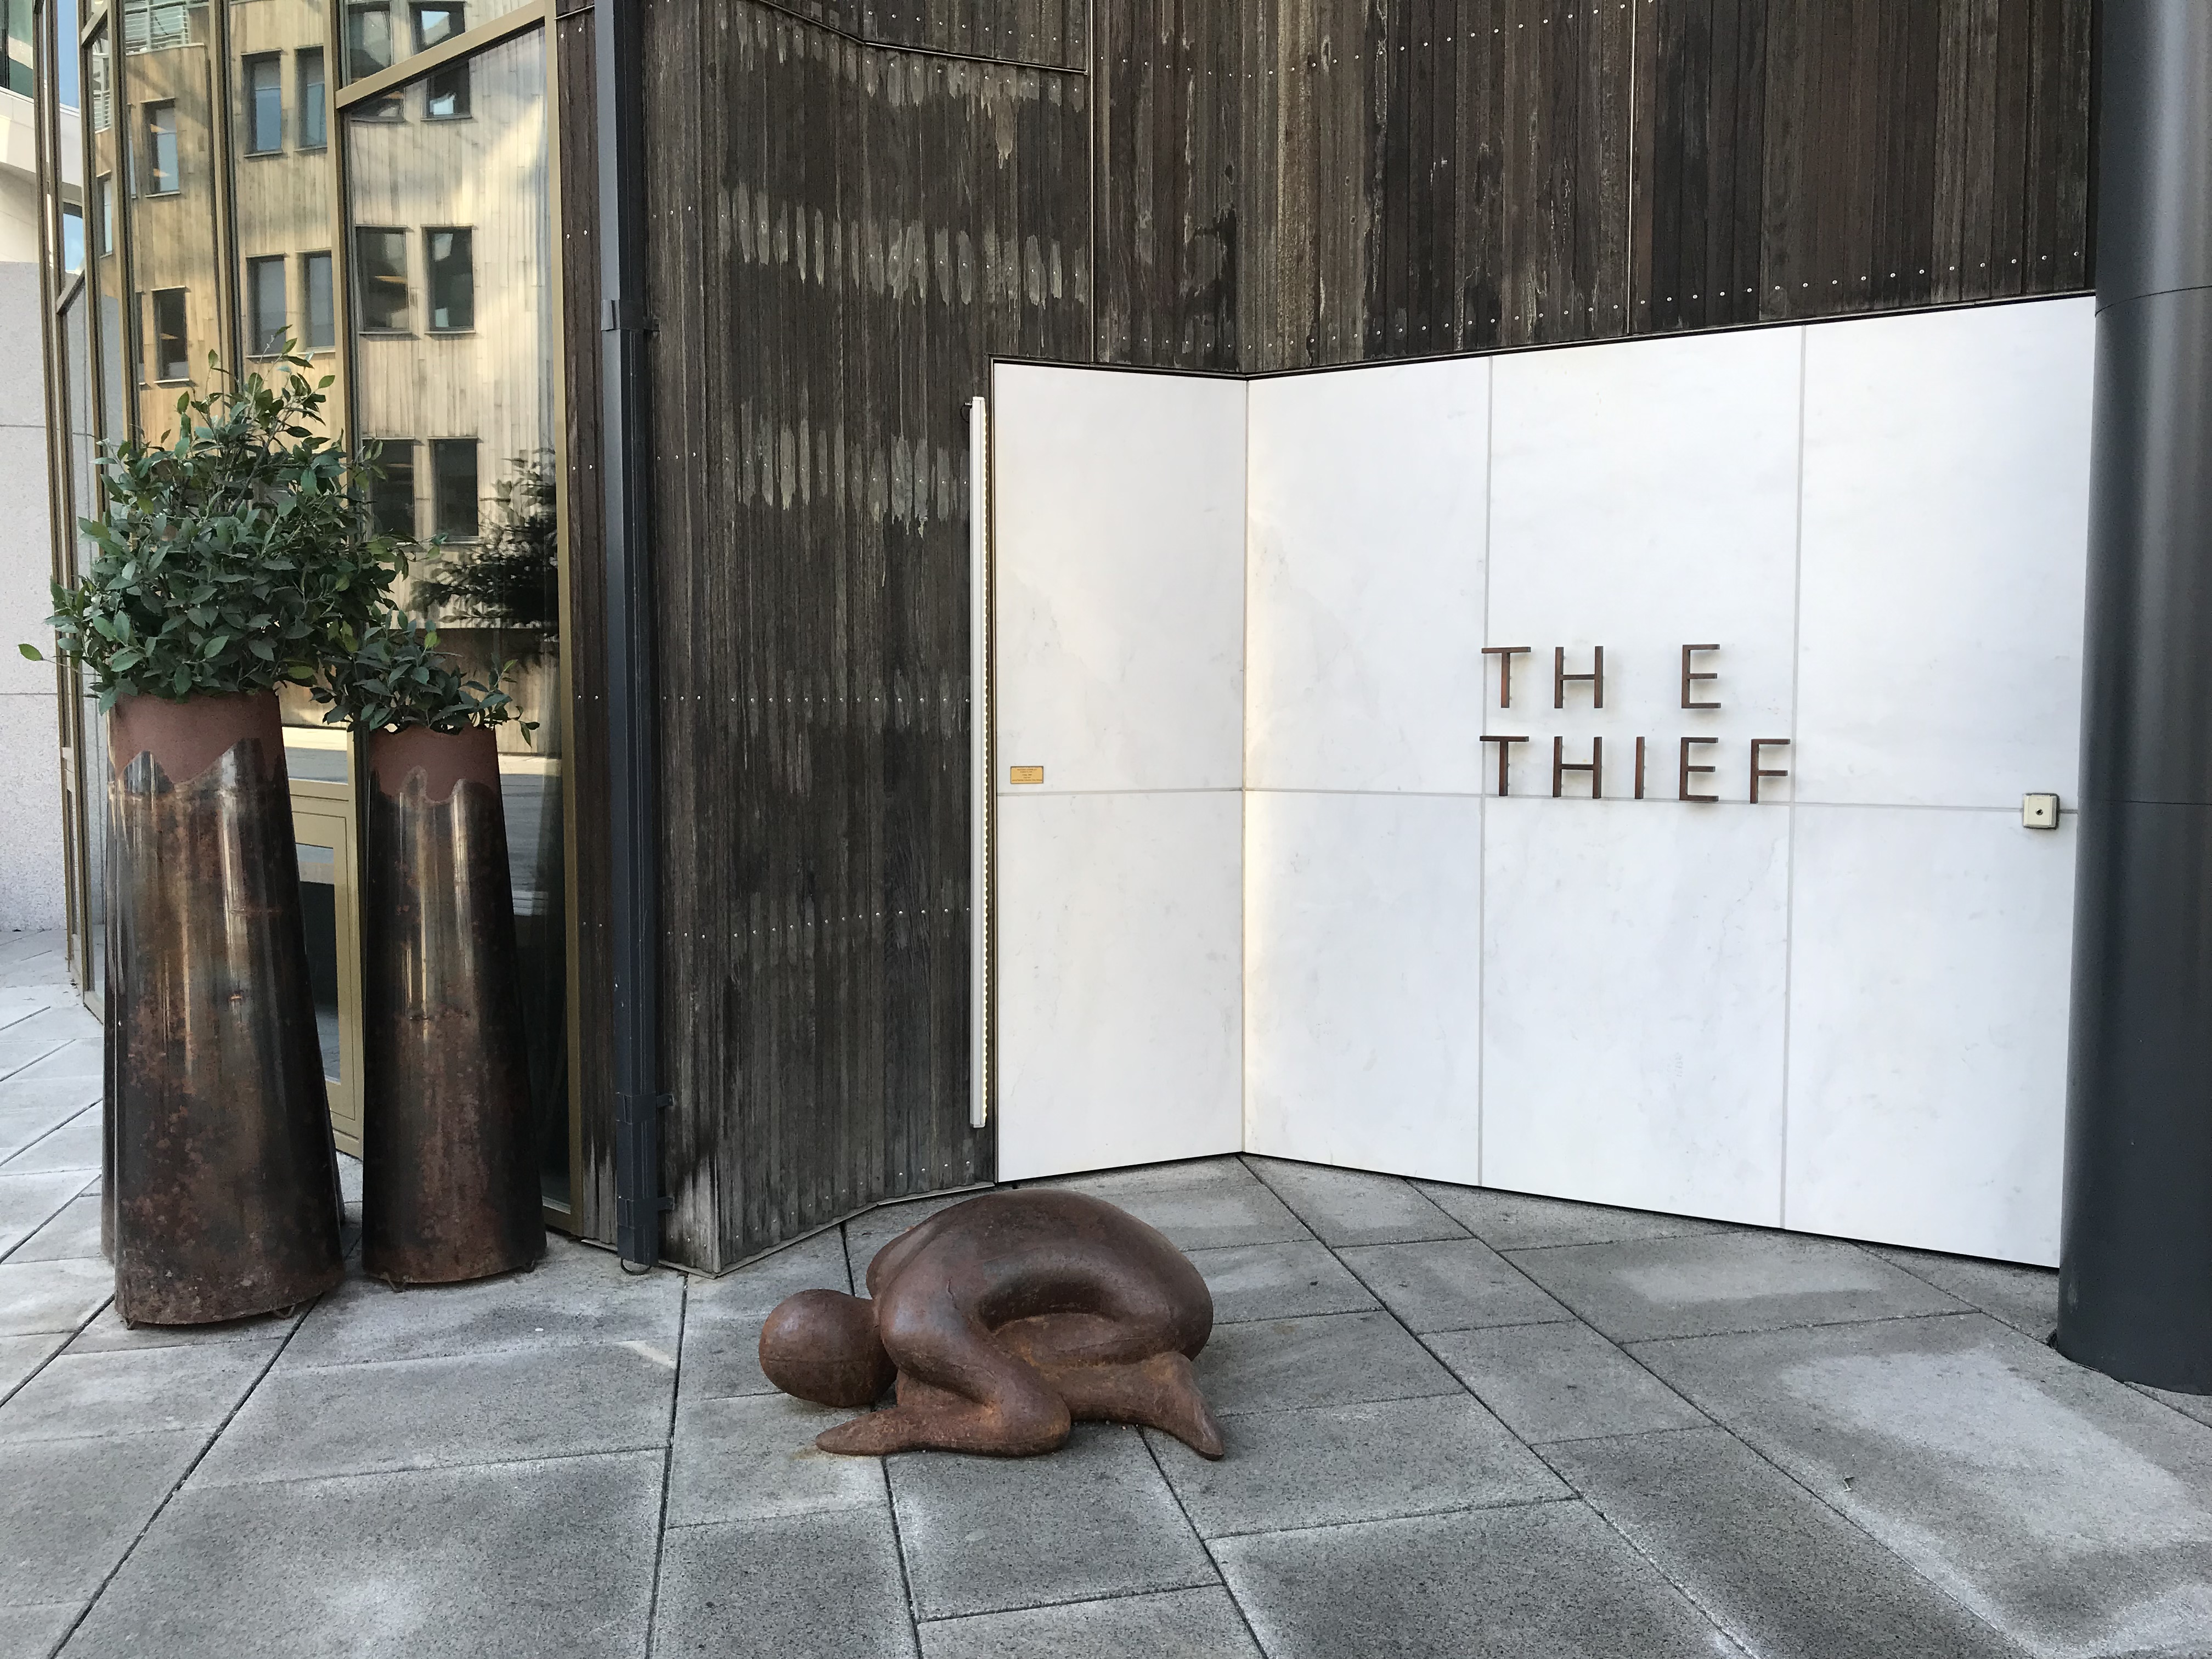 a statue of a person lying on the ground outside of a building